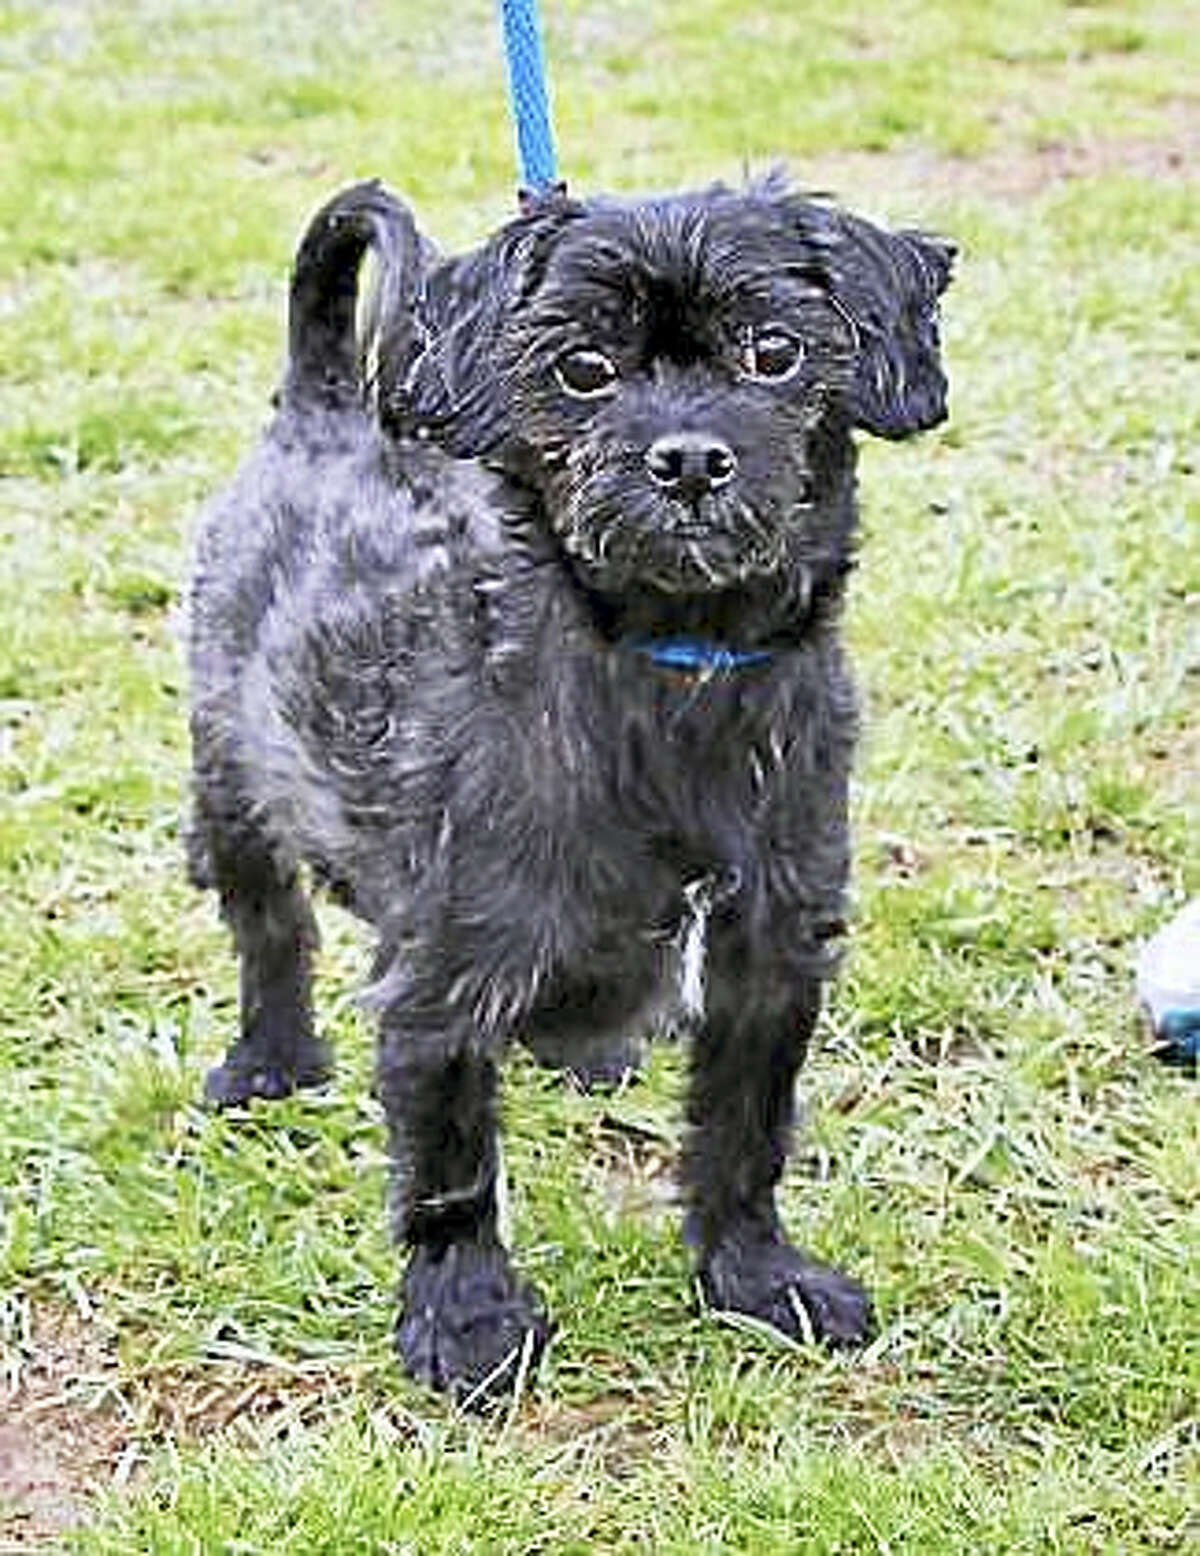 Adorable Shaggy can live in any size home, including apartments. This is a Shih Tzu/Mini Poodle mix who would like to live with kids over age 6. Shaggy has not had much experience with cats or dogs but he is willing to consider sharing his home with a furry friend. Shaggy is calm but he does have his moments of energy and needs to get some exercise every day. This is a great dog with lots of potential. Shaggy does have some special needs but still has lots of life to live and love to give. He needs a family with general dog experience.Please ask the adoption counselor to explain when you visit with me.Remember, the Connecticut Humane Society has no time limits for adoption.Inquiries for adoption should be made at the Connecticut Humane Society located at 701 Russell Road in Newington or by calling (860) 594-4500 or toll free at 1-800-452-0114.The Connecticut Humane Society is a private organization with branch shelters in Waterford and Westport. The Connecticut Humane Society is not affiliated with any other animal welfare organizations on the national, regional or local level.